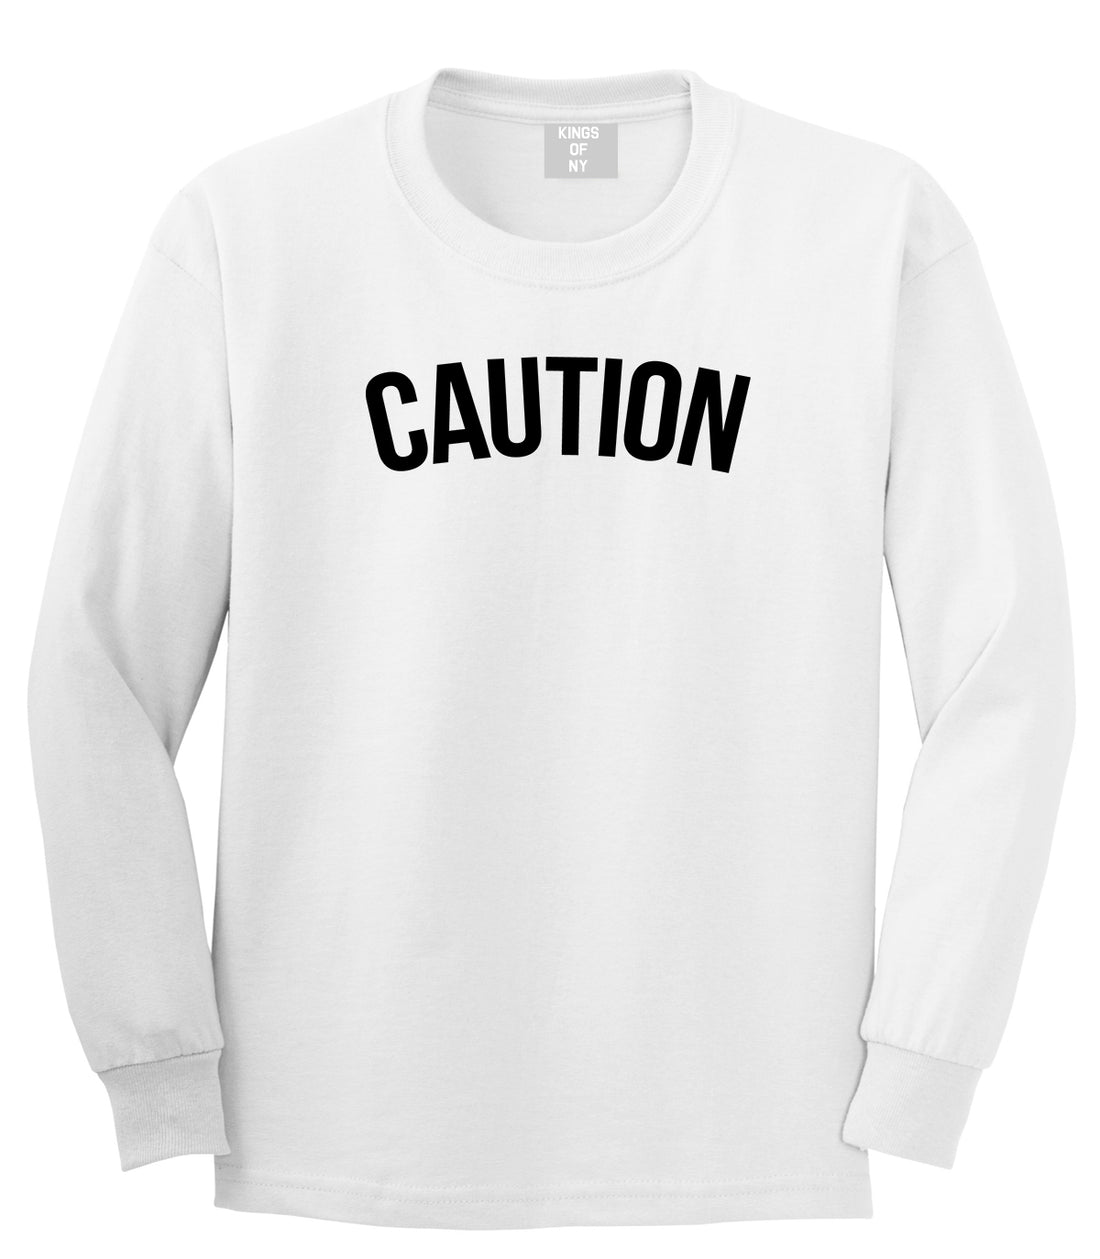 Caution Mens Long Sleeve T-Shirt White by Kings Of NY